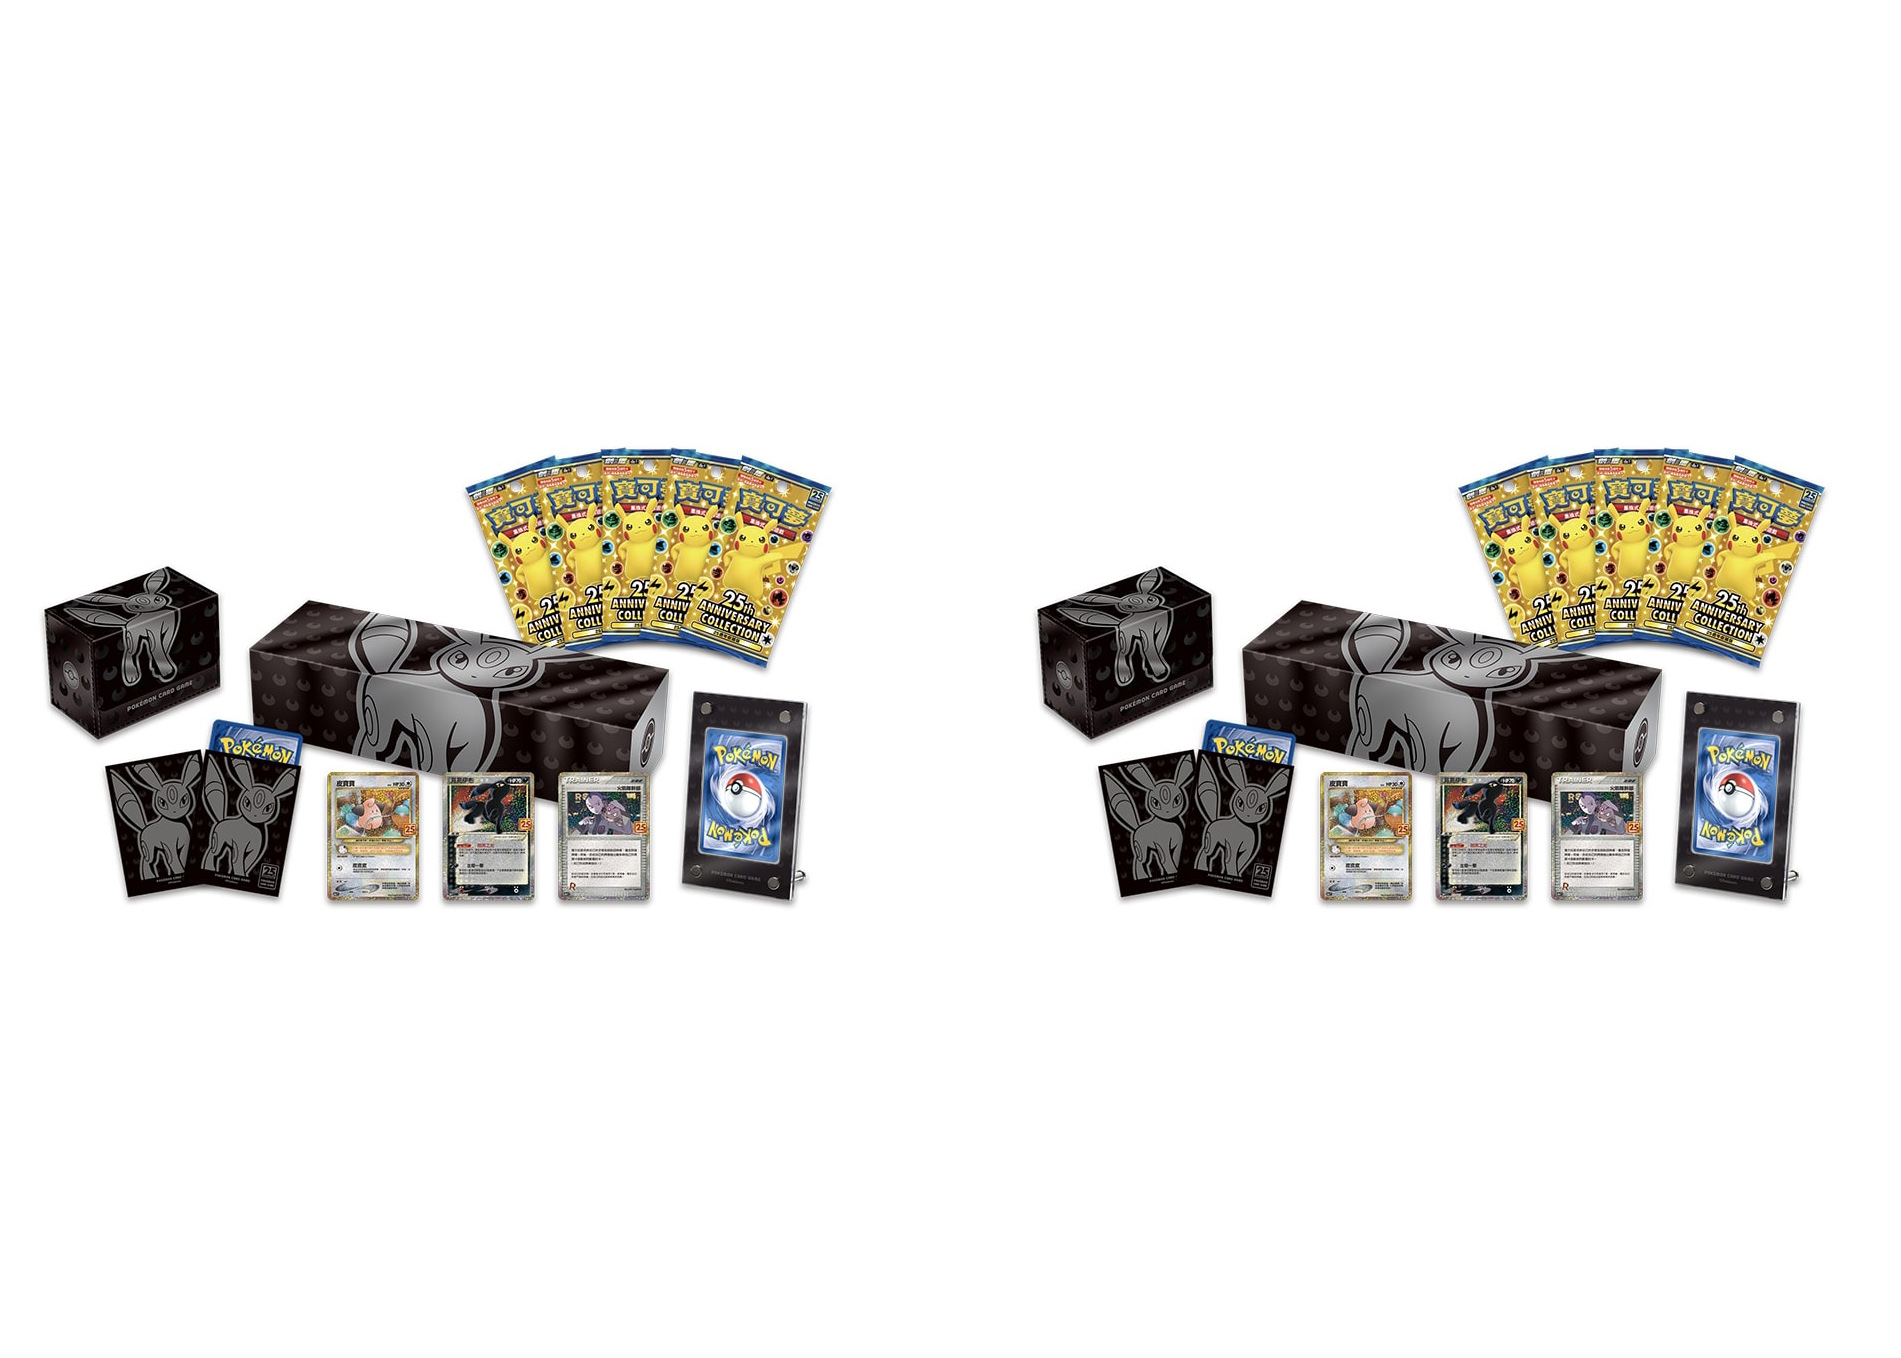 Pokémon TCG 25th Anniversary Collection Golden Box (Traditional 